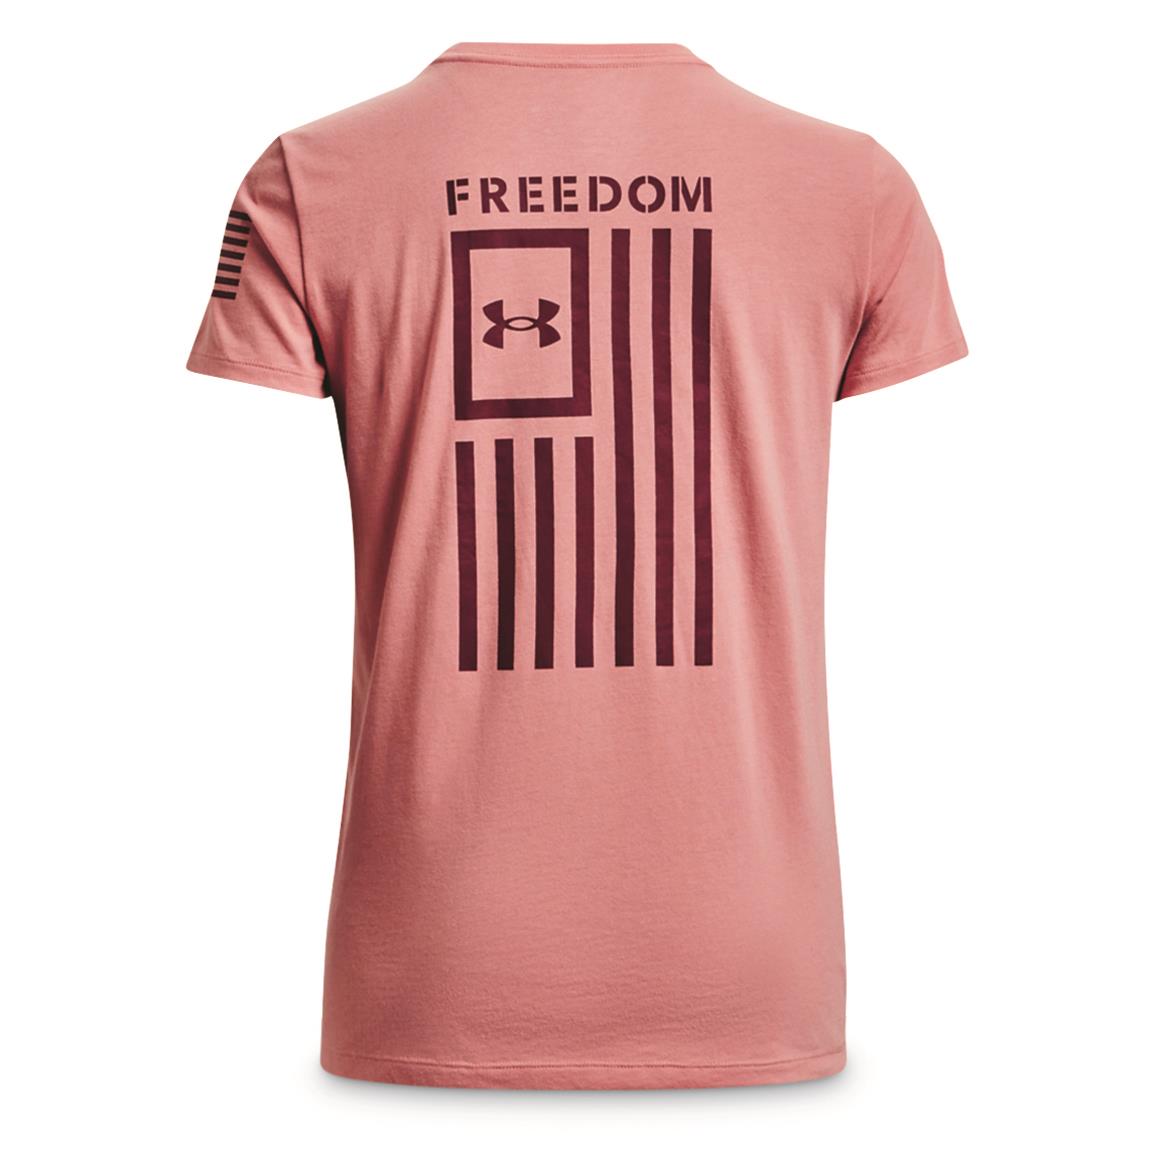 Under Armour Women's Freedom Flag T-Shirt, Pink Clay/league Red